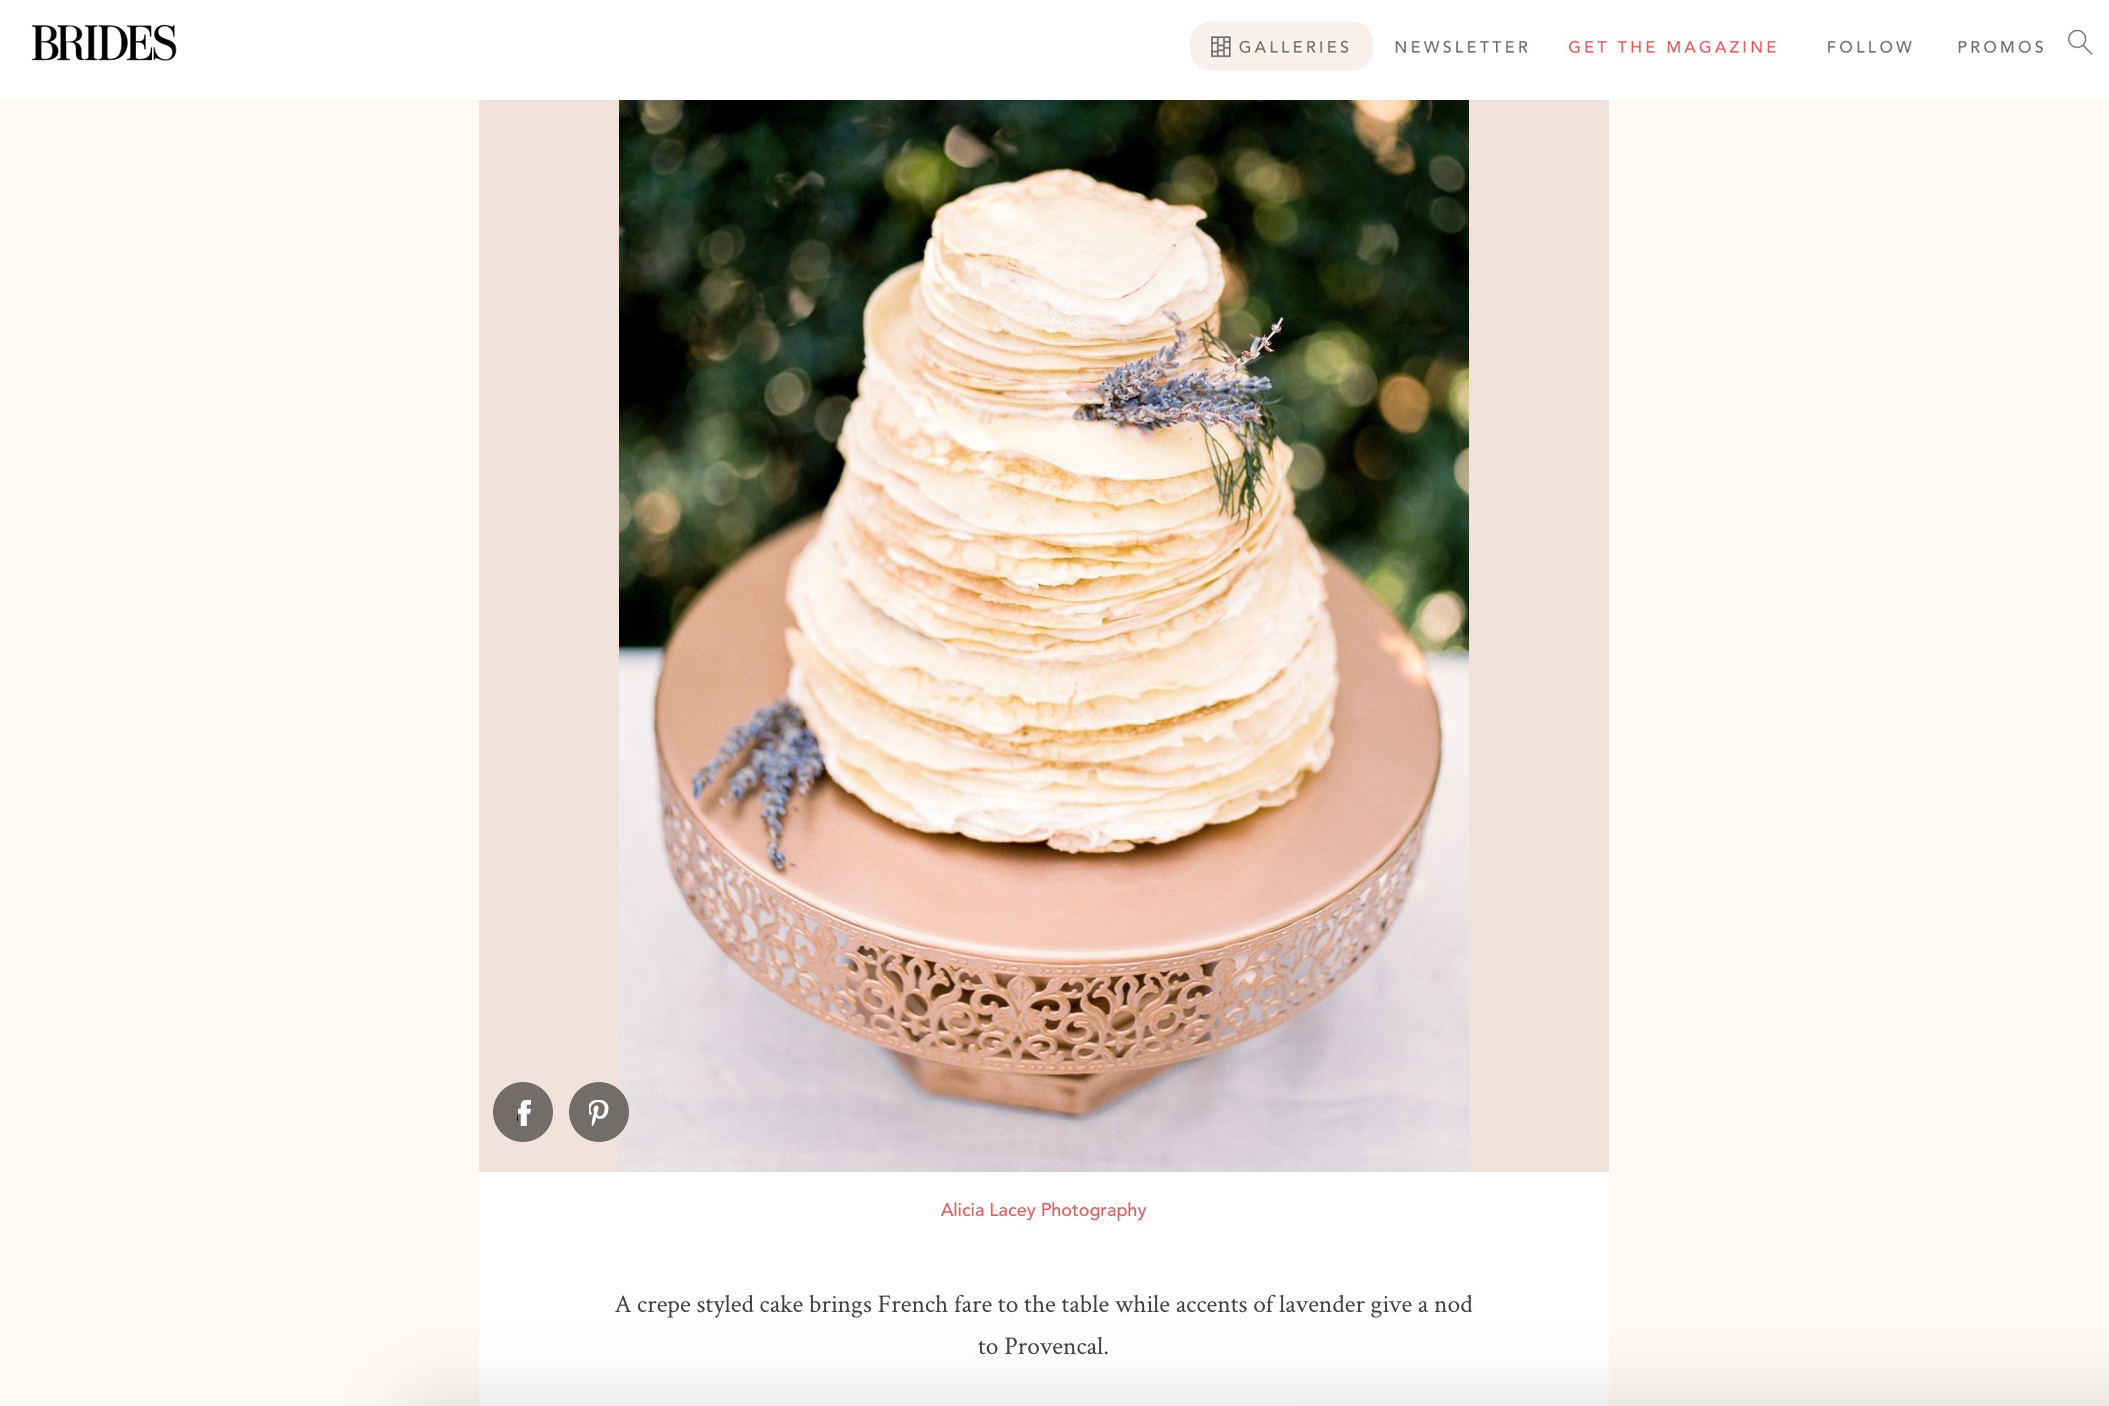 Brides Magazine featured 25 images of French wedding inspiration, including one of a crepe cake by this Washington, DC-based wedding photographer.